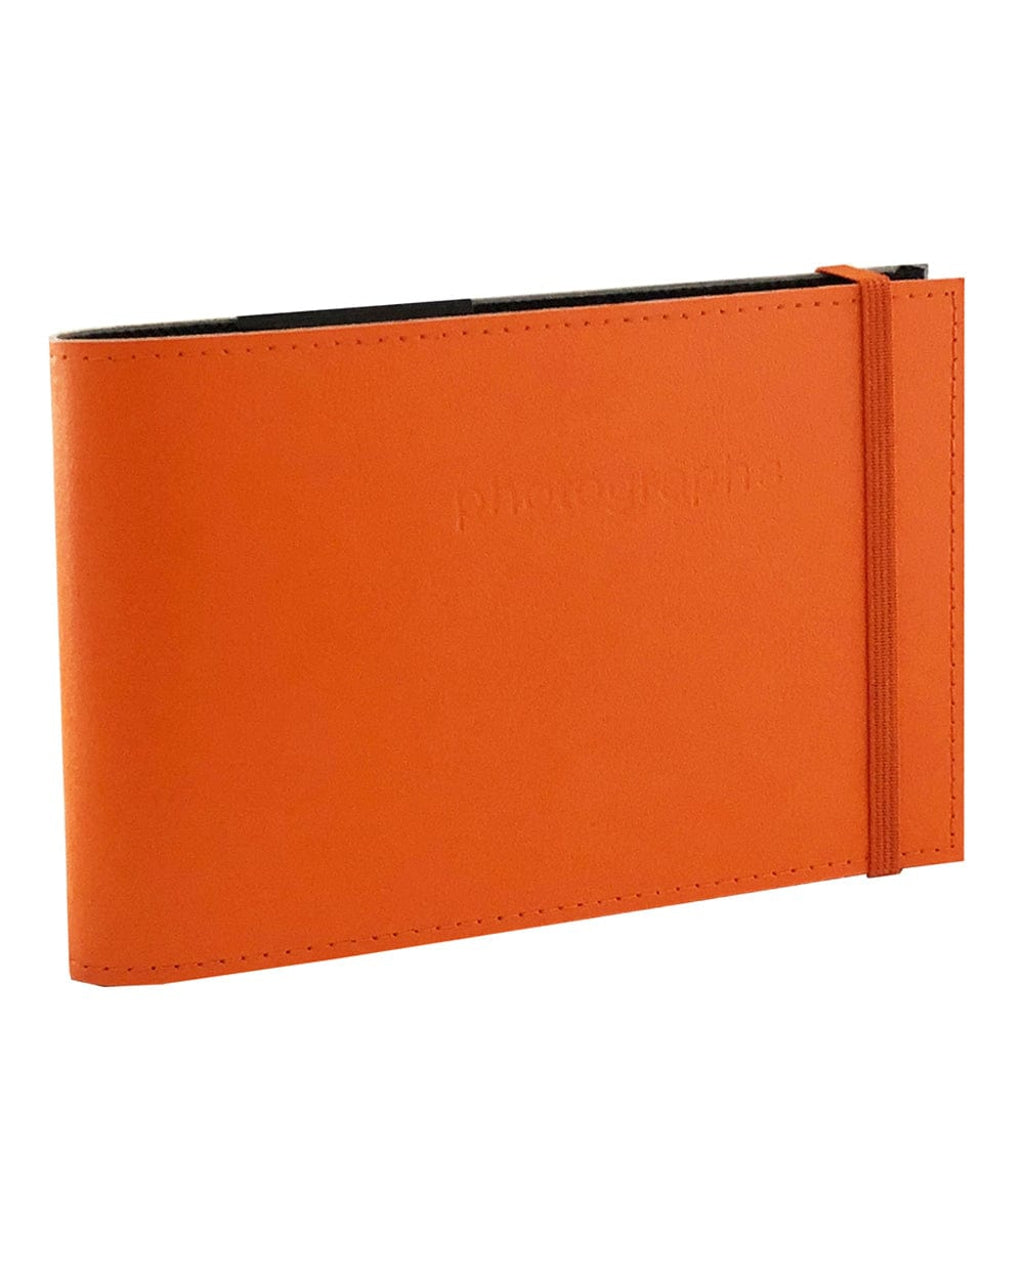 Citi Leather Orange Peel Slip-in Bragbook Photo Album from our Photo Albums collection by Profile Products Australia